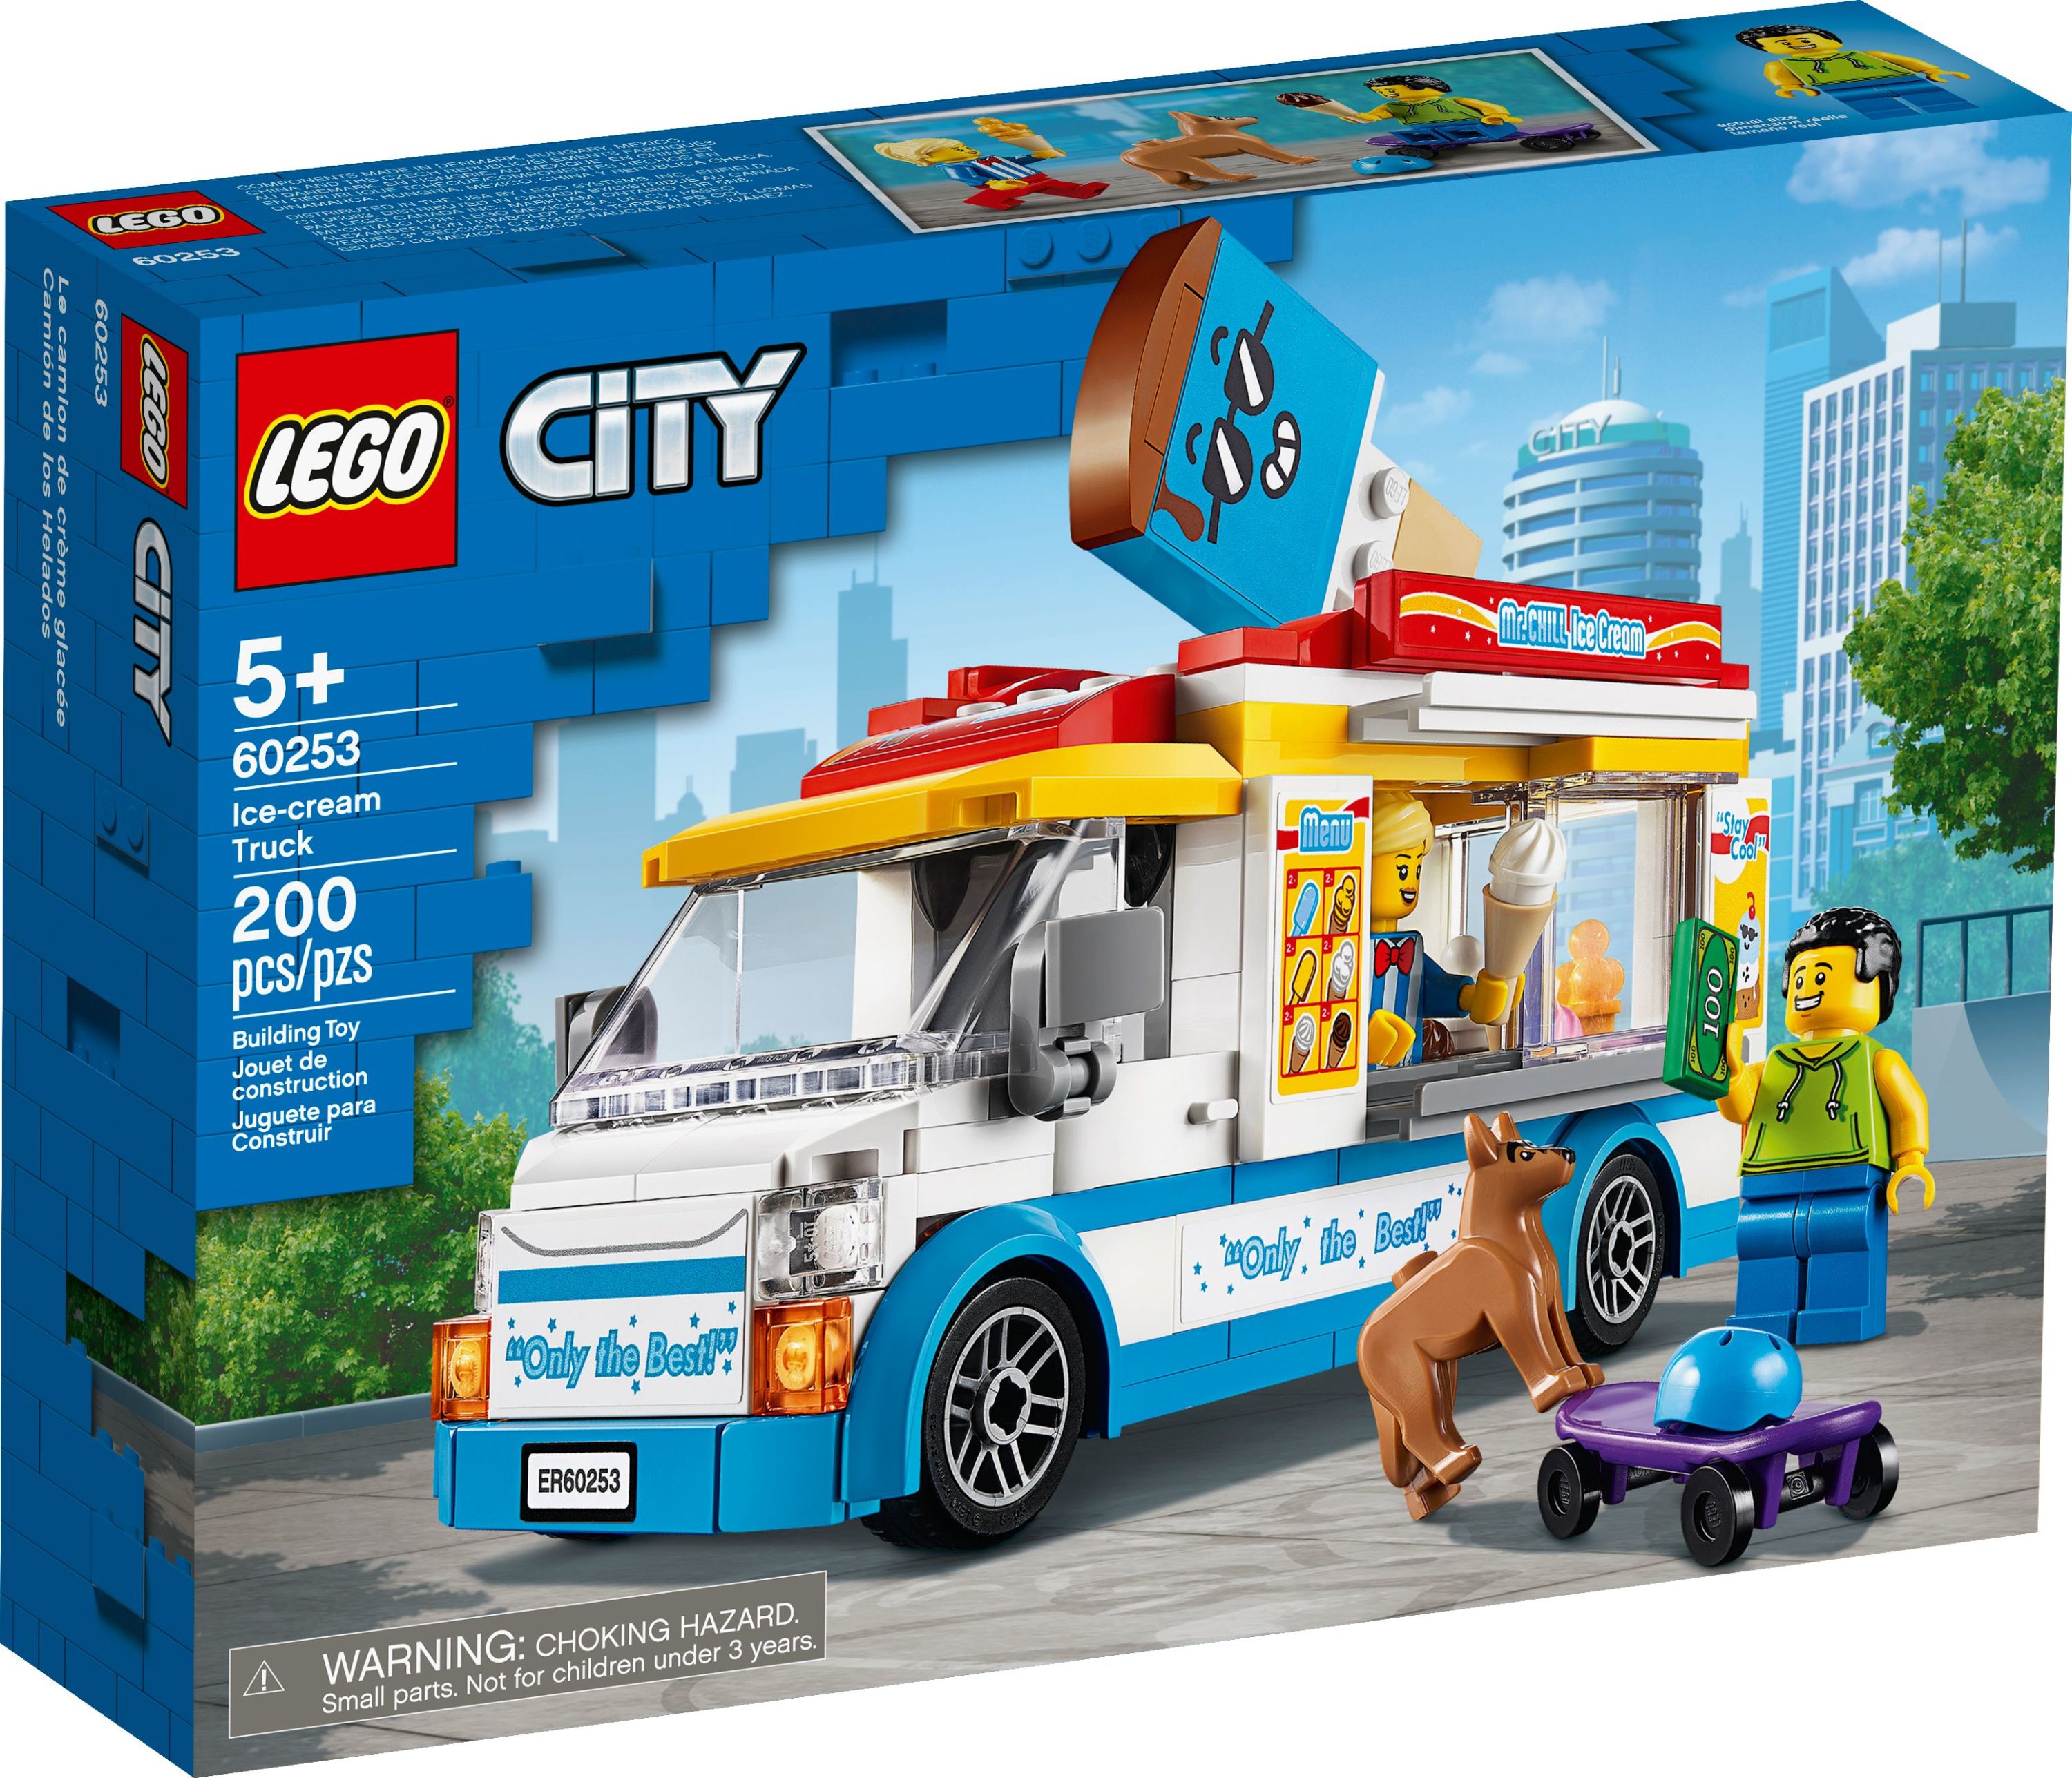 LEGO City Ice Cream Truck Van 60253 Building Toy Set - Featuring Skater Minifigures, Skateboard, and Dog Figure, Fun Gift Idea for Boys, Girls, and Kids Ages 5+ - image 3 of 10